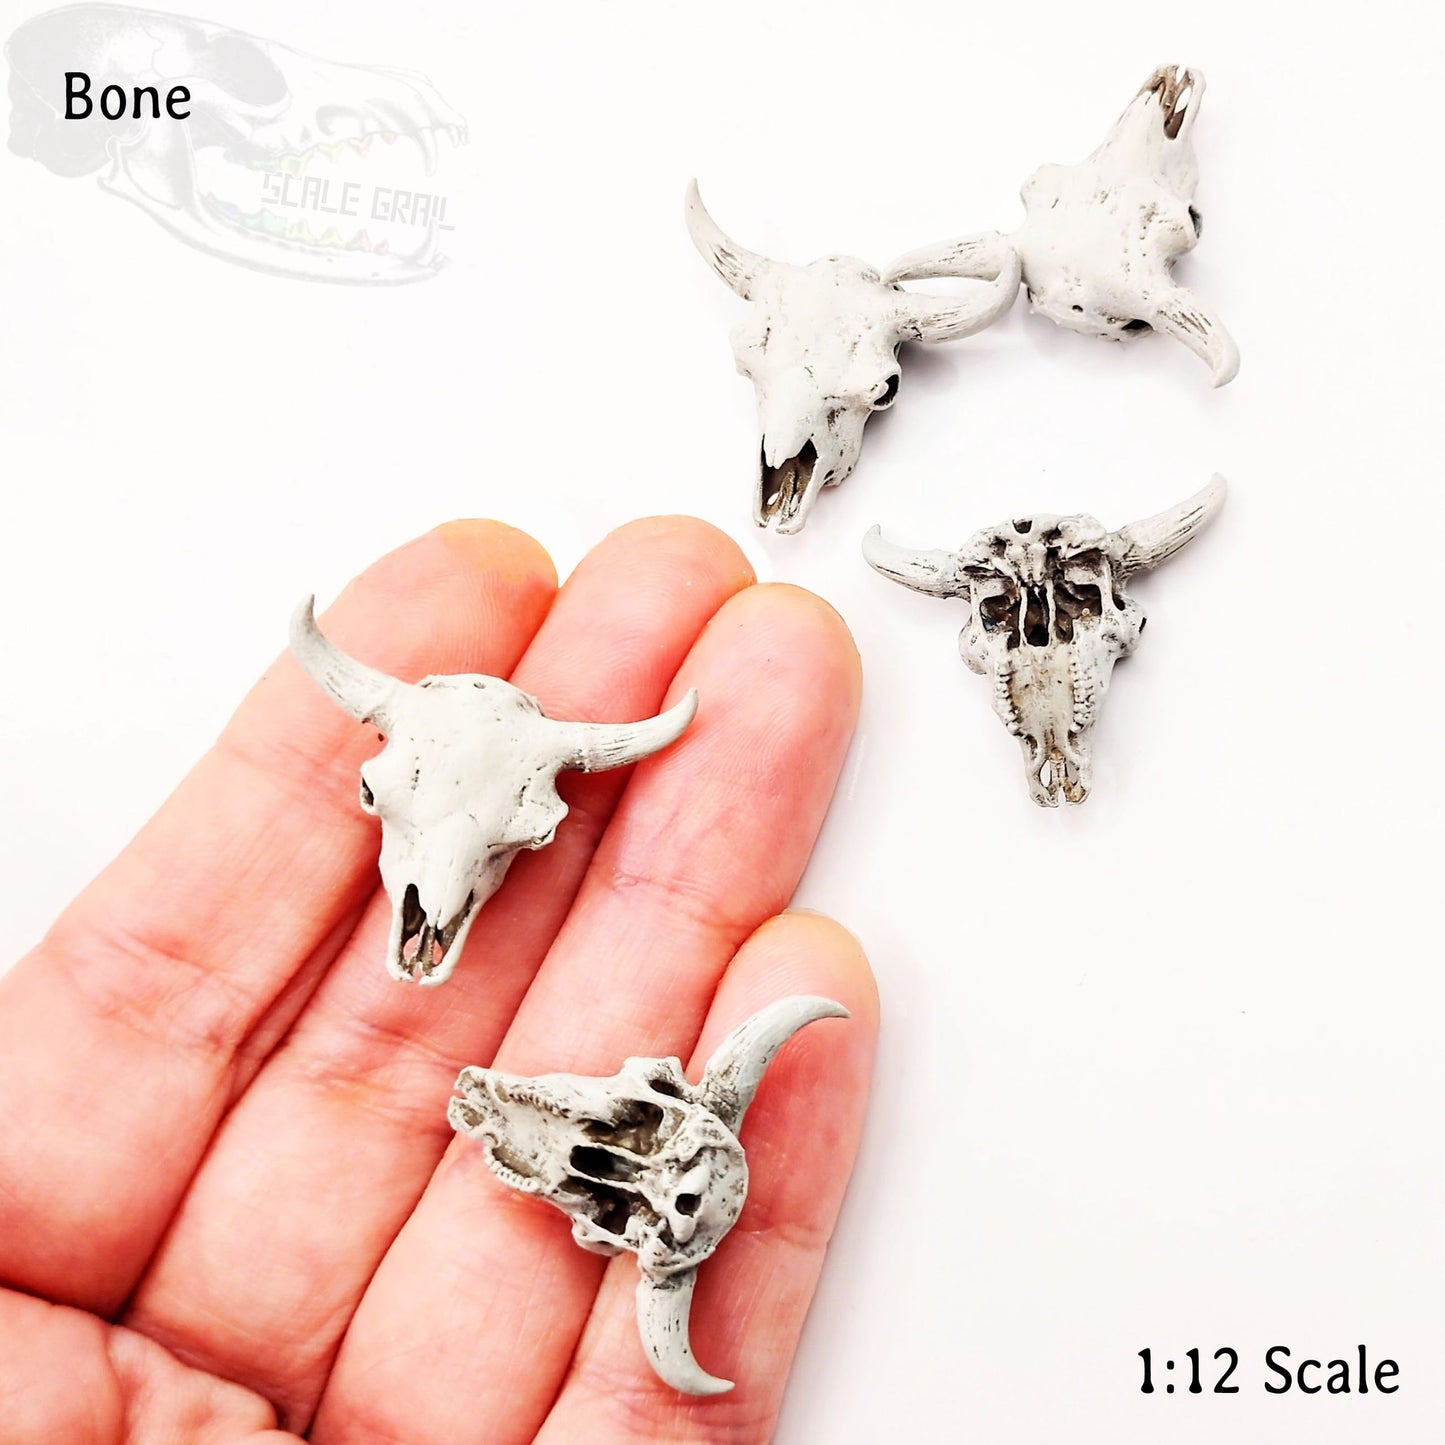 American Bison Skull - 1:24 scale miniature small size for desert diorama, western dollhouse, arts and crafts, replica oddities (5 skulls)